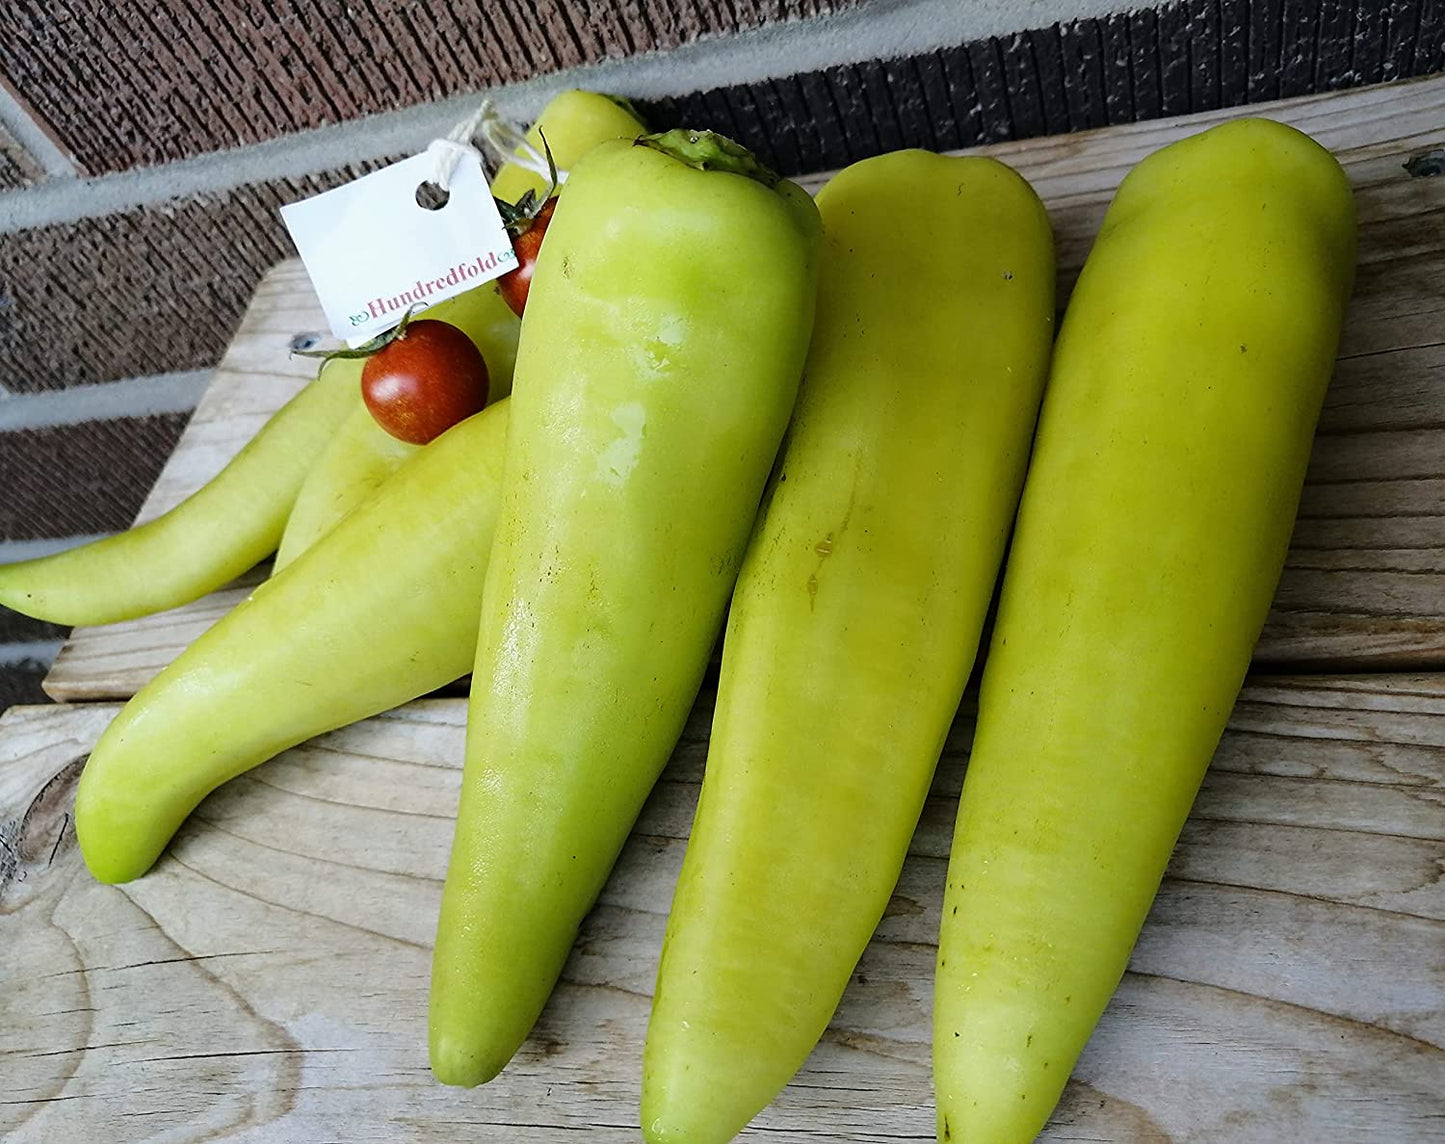 Hundredfold Banana Elongated Sweet Pepper 50 Vegetable Seeds - Capsicum annuum Non-GMO Juicy and Crispy Fruits for Tasty Fresh Eating, Pickle, or Grill, Shipped in Canada